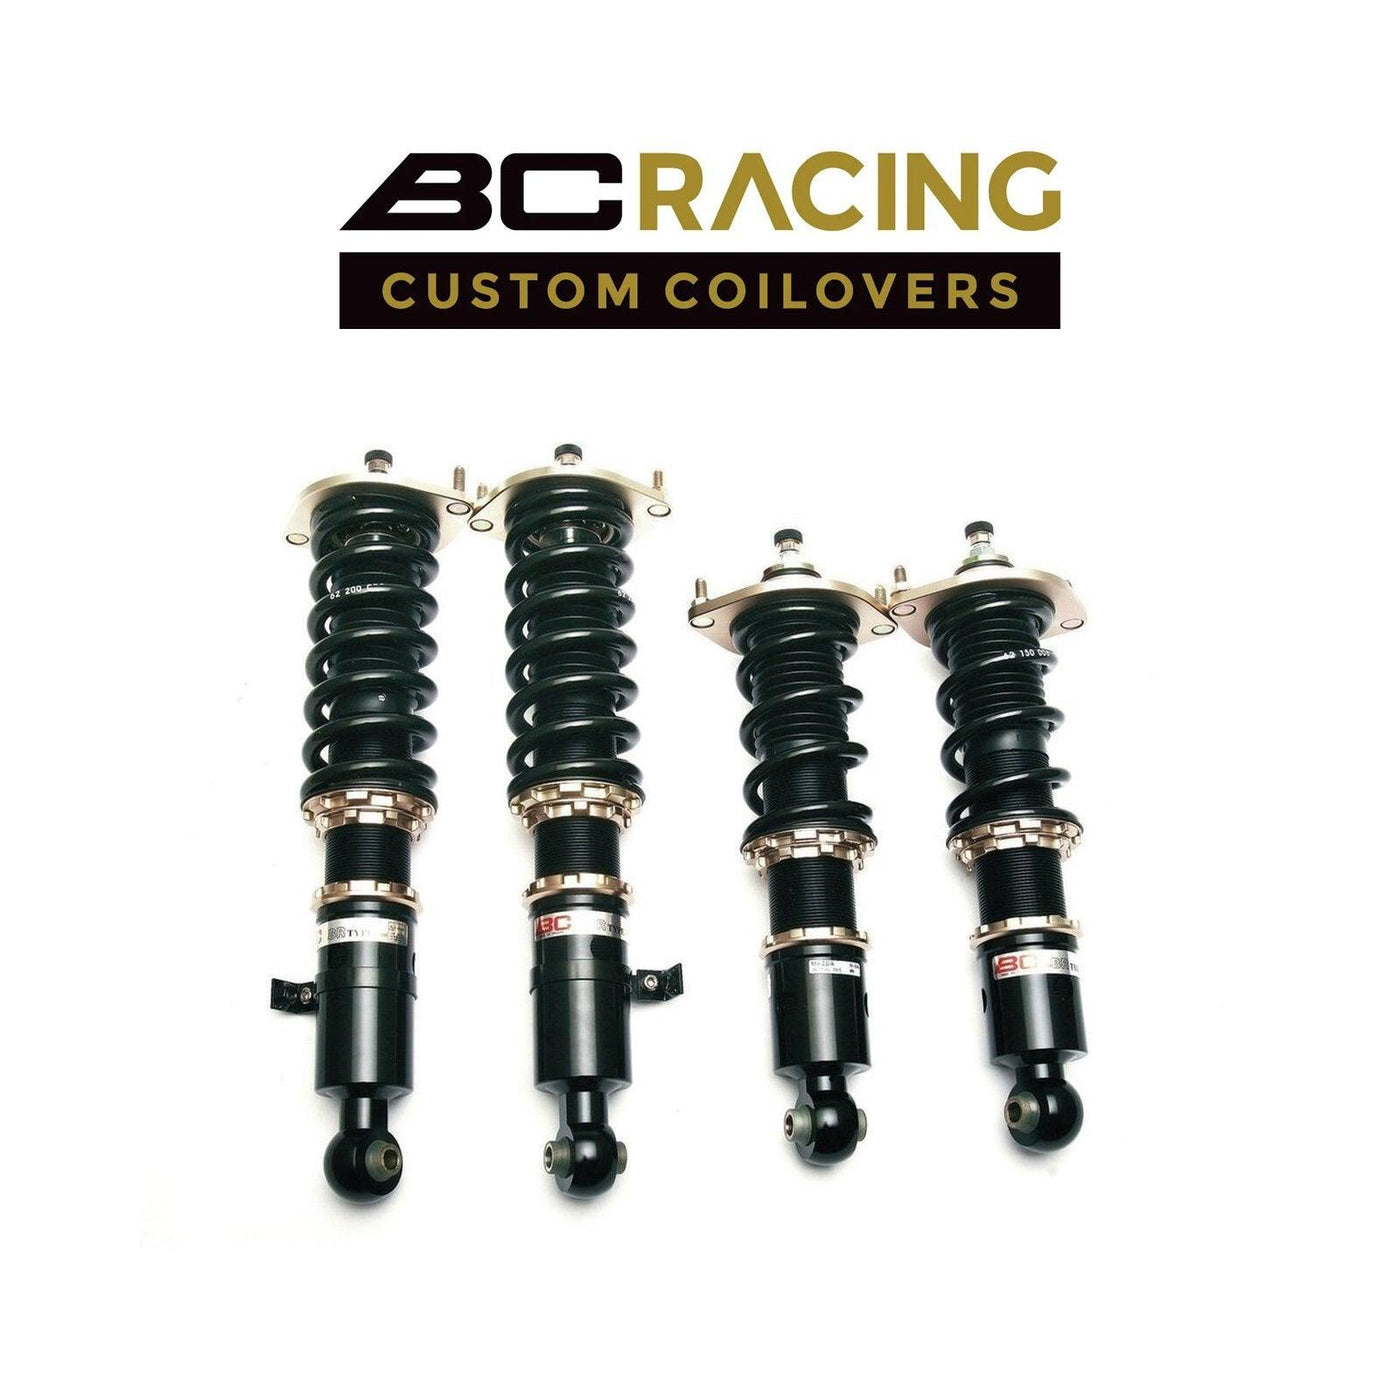 BC Racing Coilovers 2002-2006 LEXUS ES300 - Attacking the Clock Racing